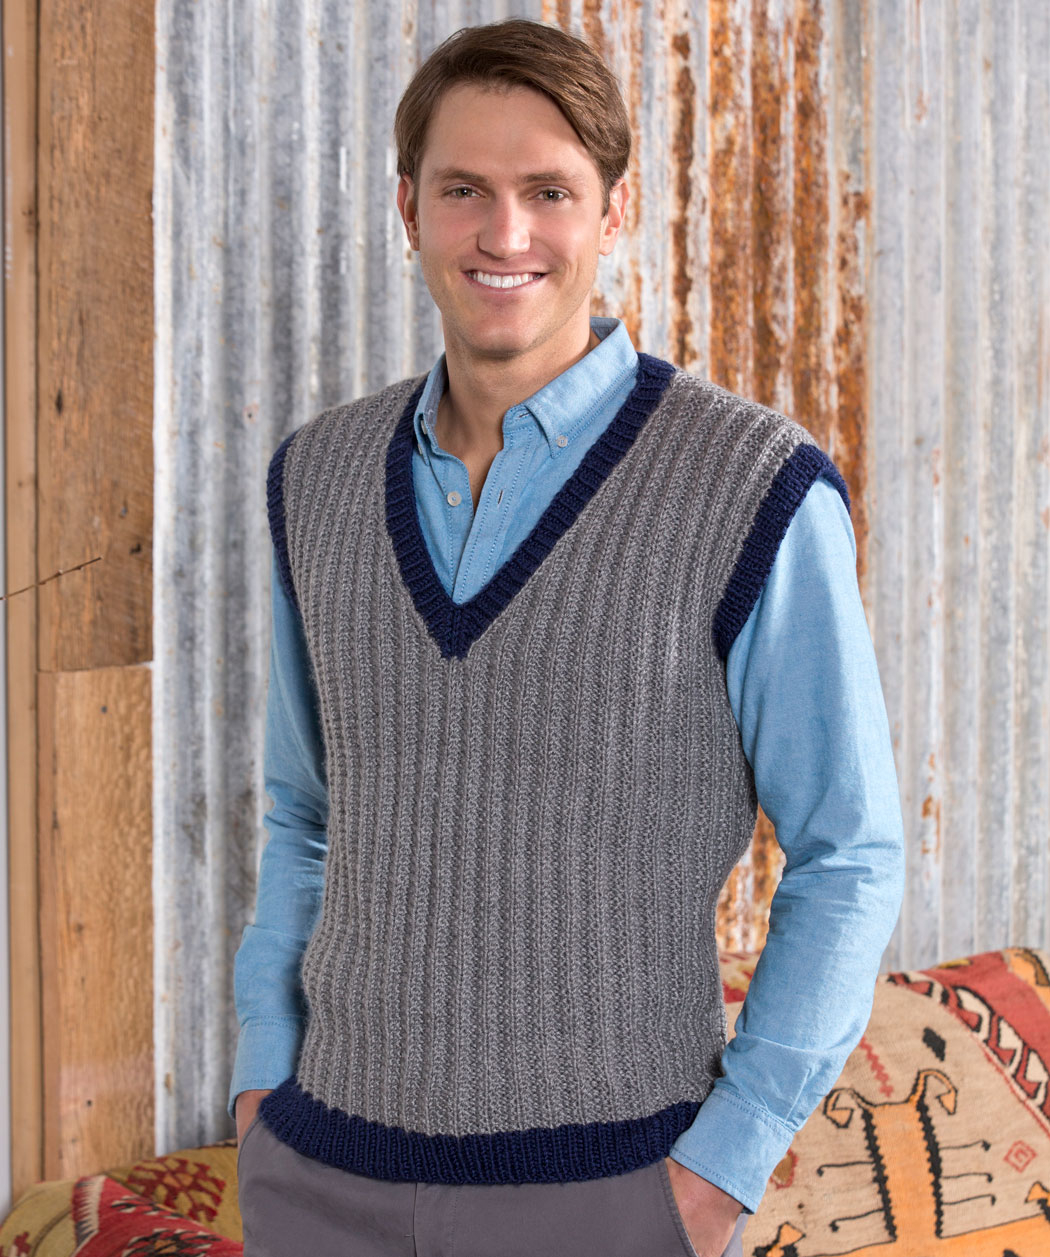 Free Crochet Patterns For Men 36 Knit And Crochet Patterns For Men Red Heart